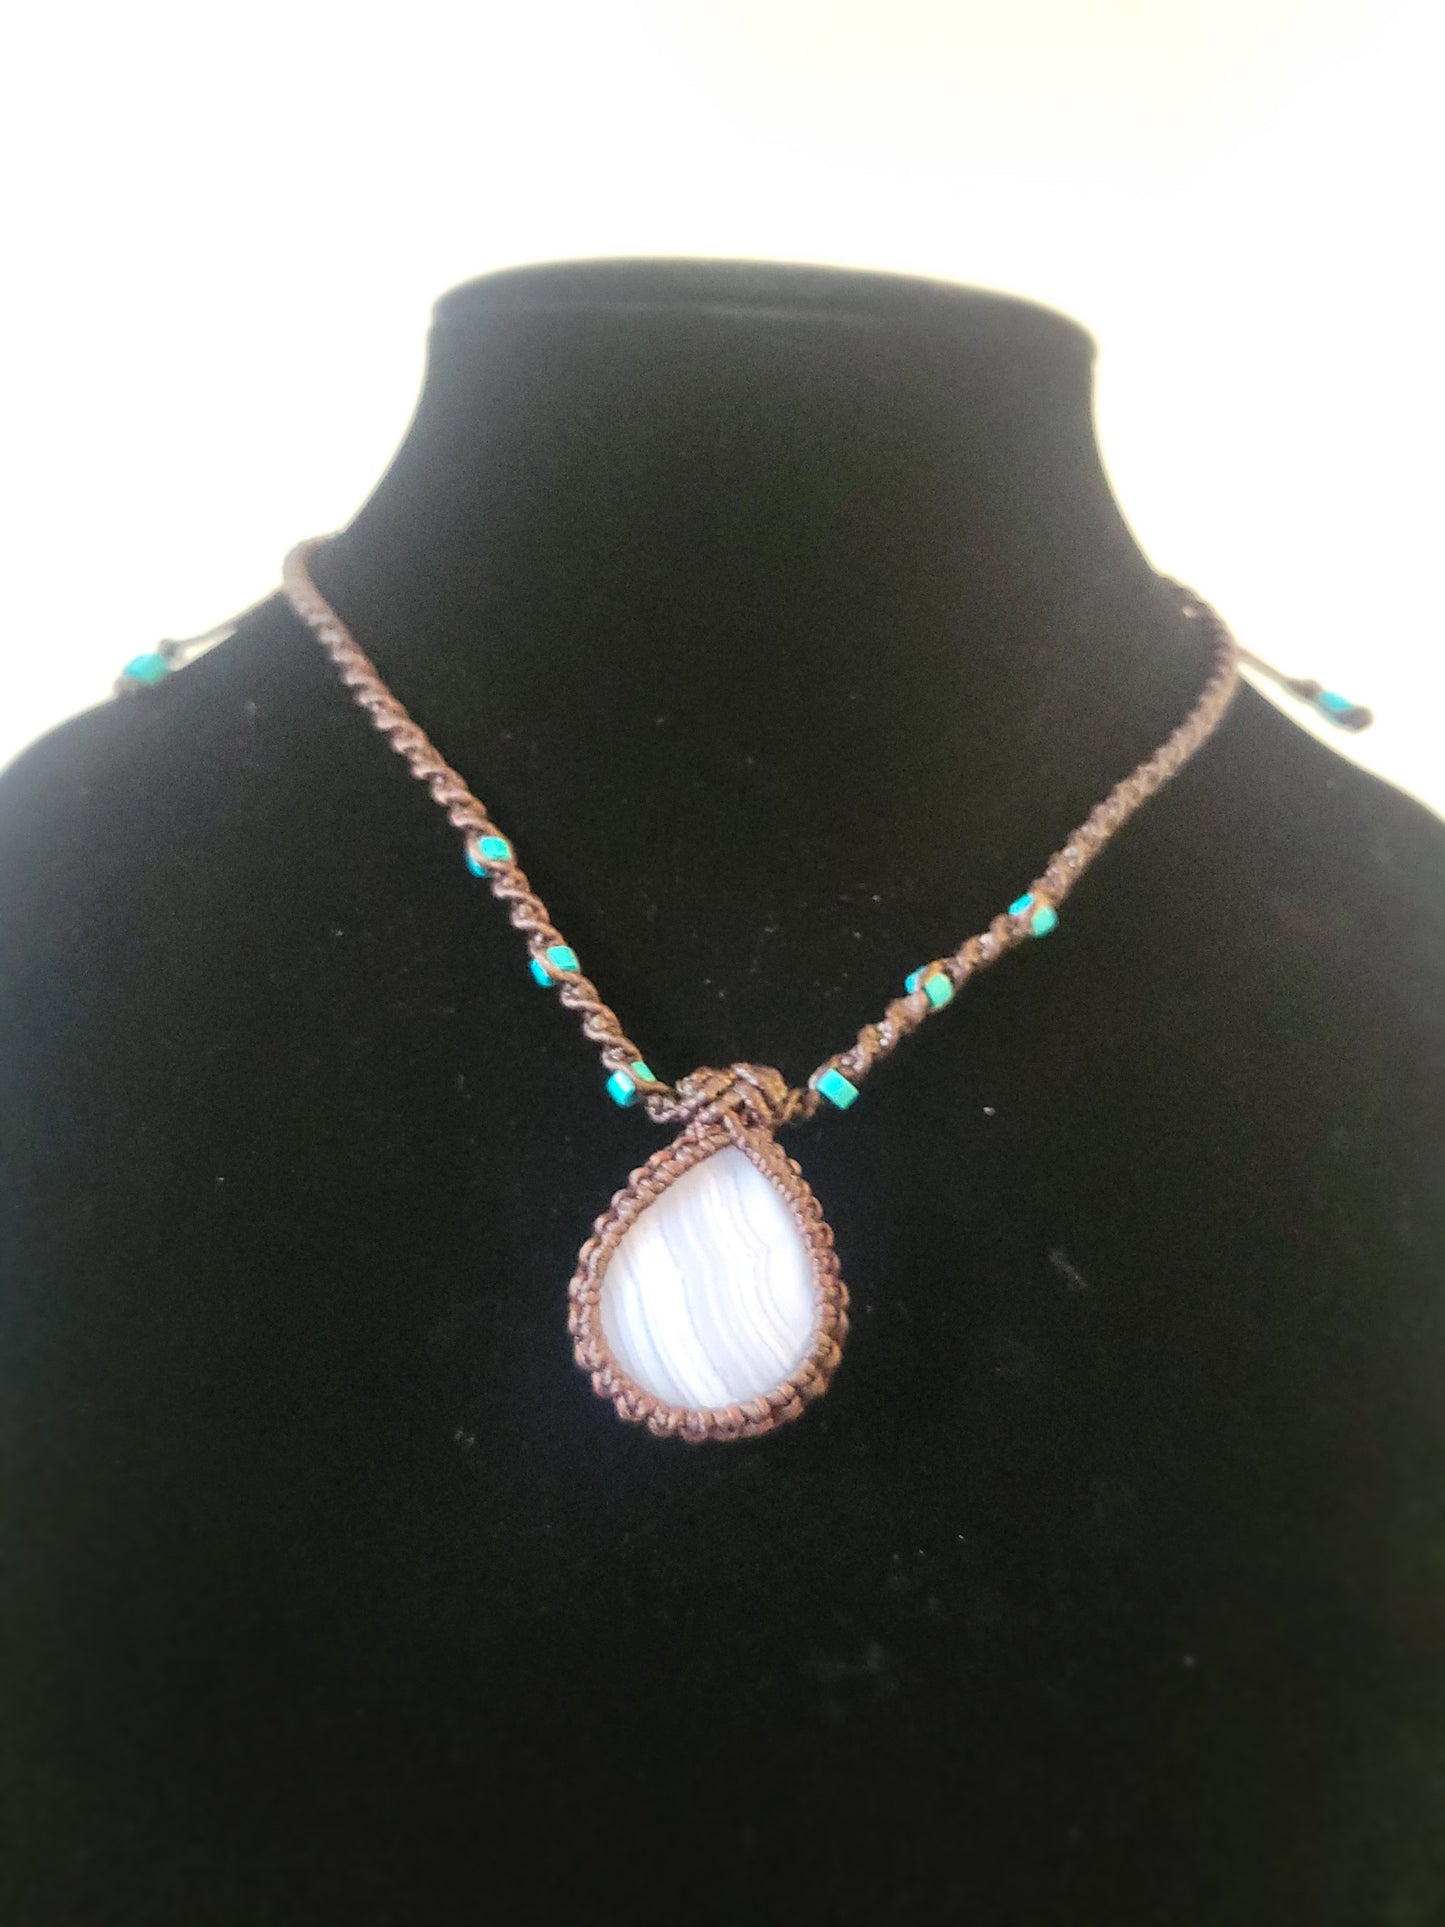 Light Blue Lace Agate Micromacrame Pendant Necklace with Turquoise Beads